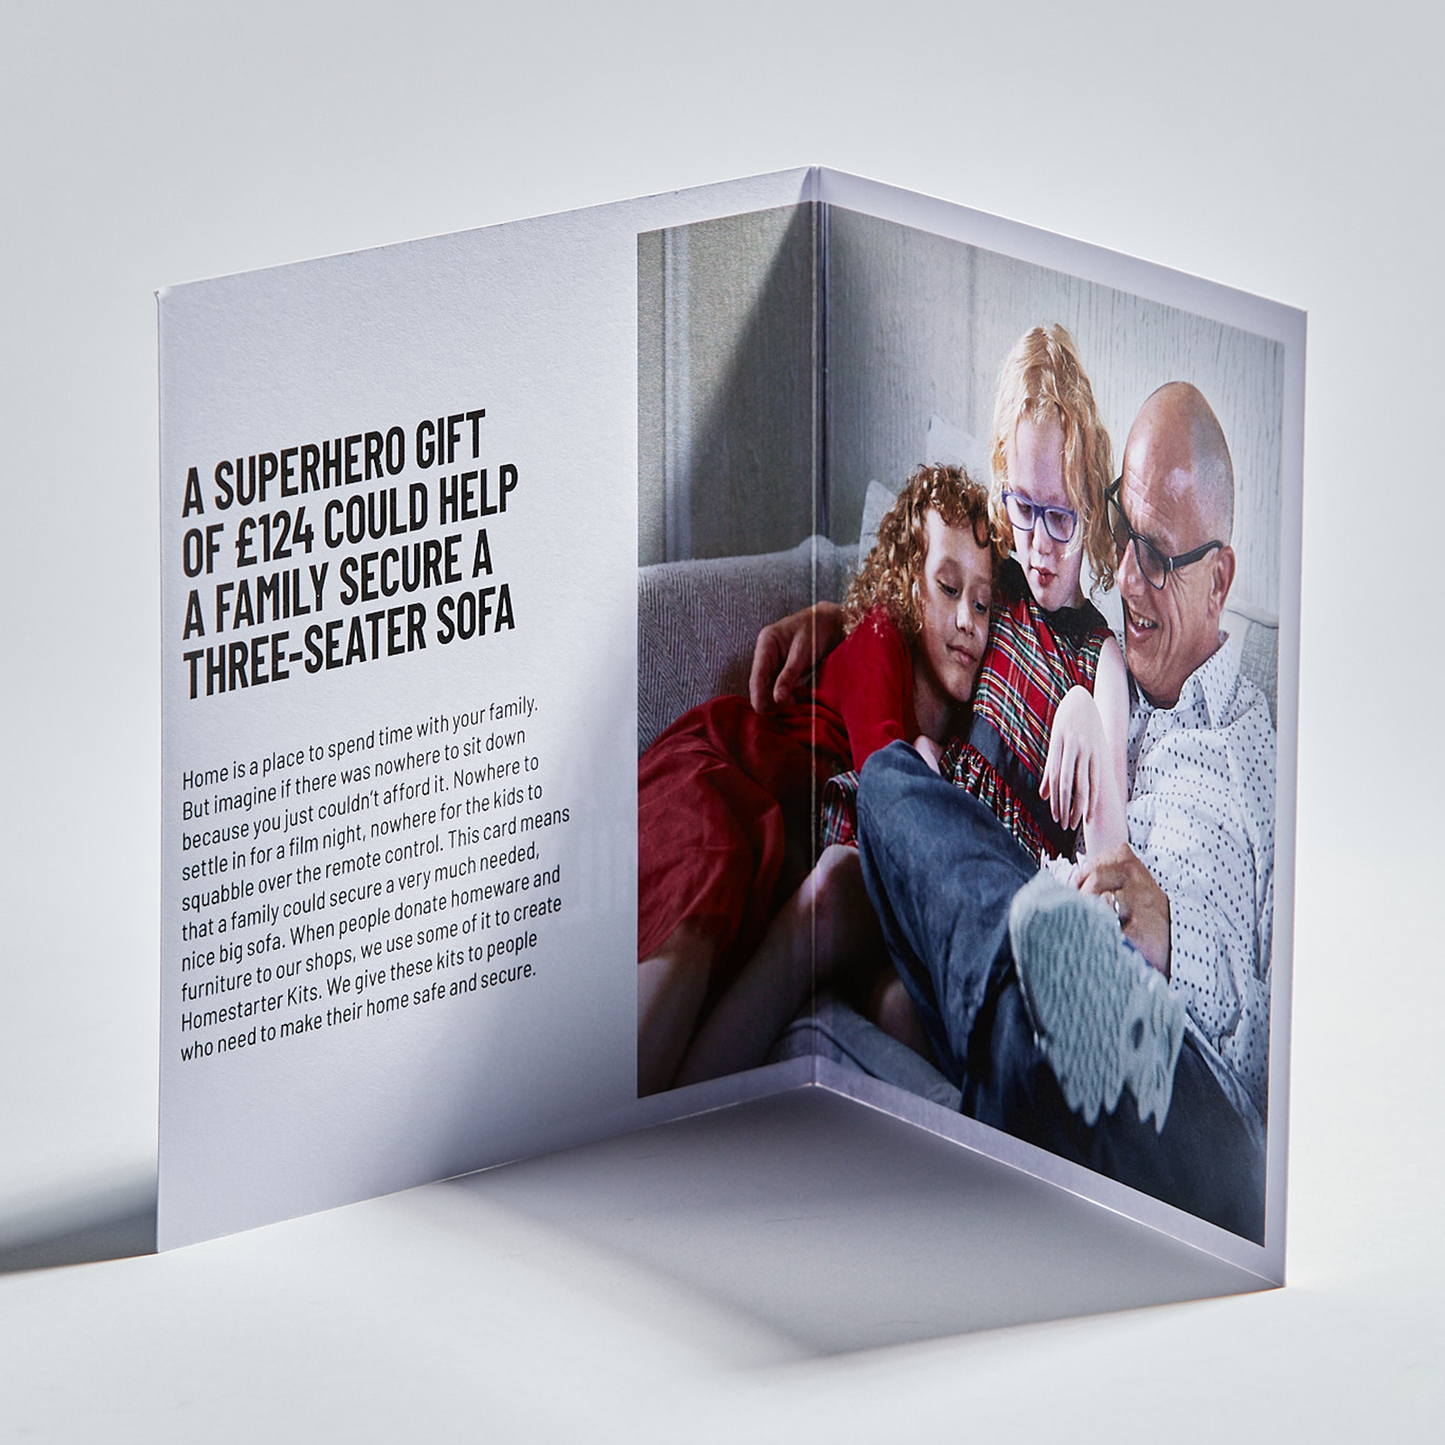 Inside of card with text and image of a man and his grandchildren reading